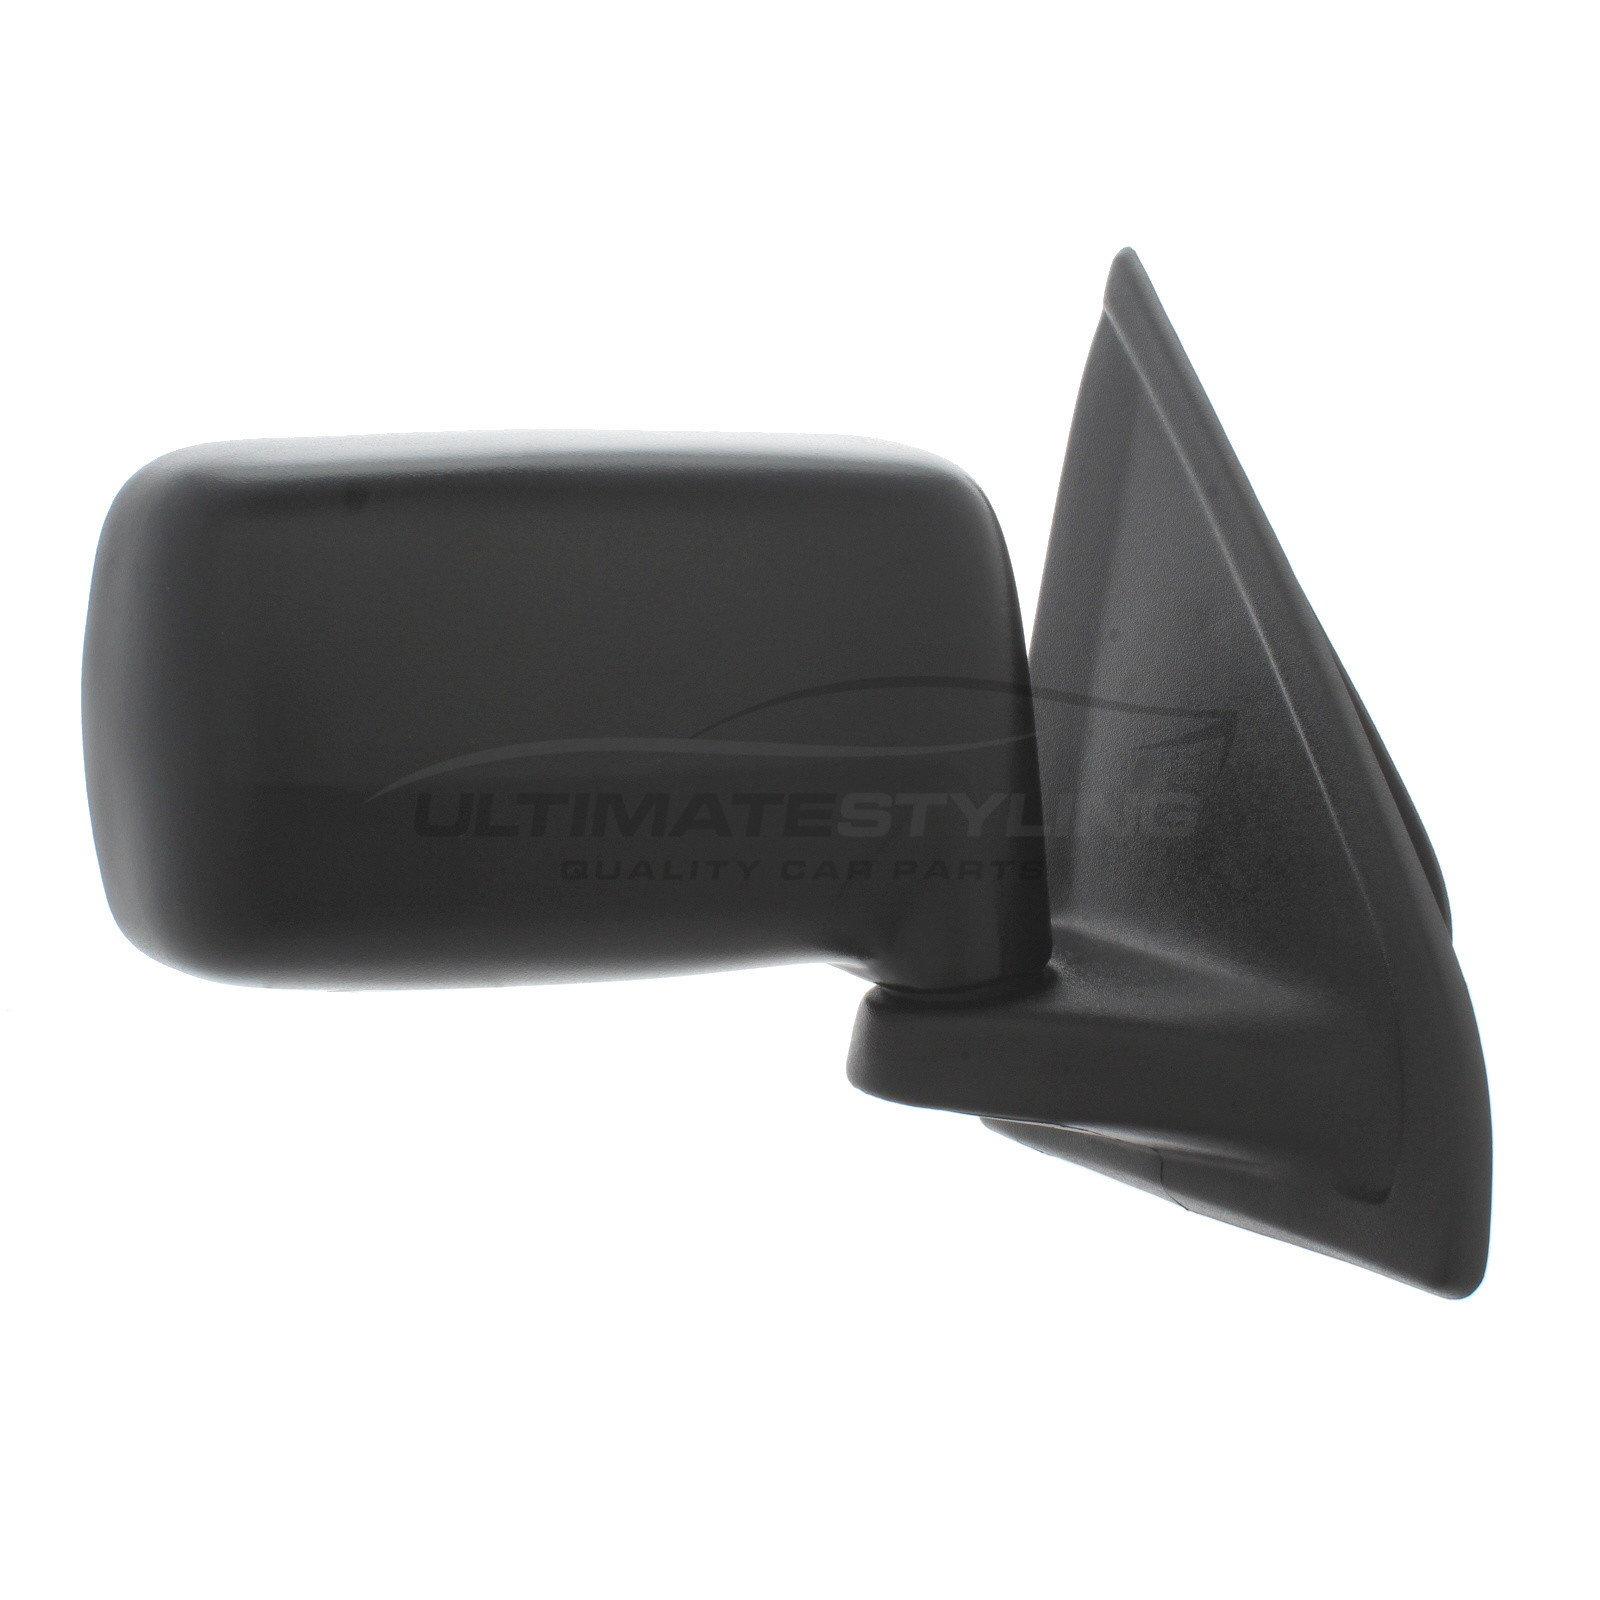 Ford Fiesta Wing Mirror / Door Mirror - Drivers Side (RH) - Lever adjustment - Non-Heated Glass - Black